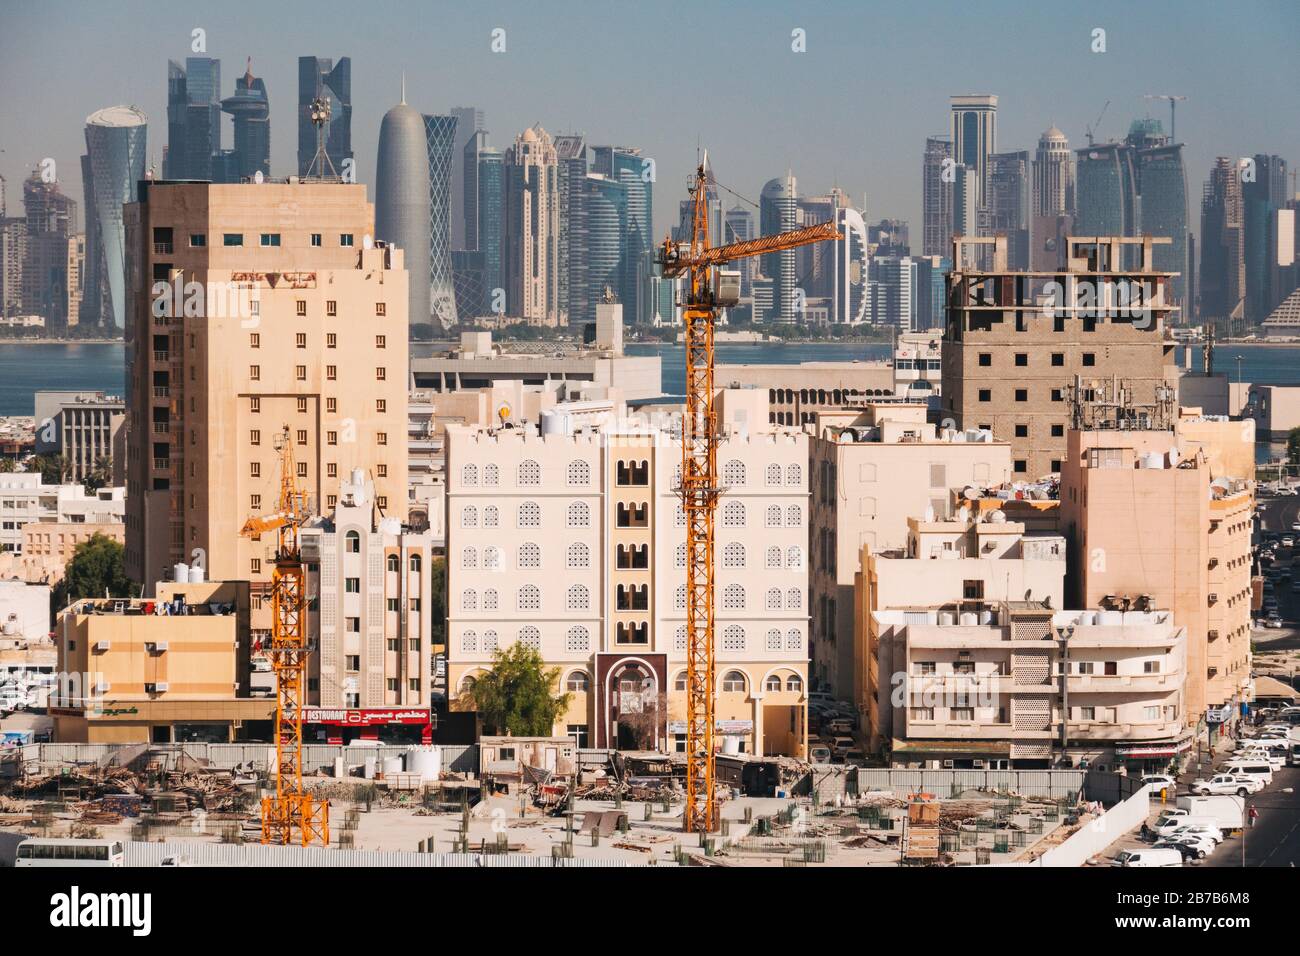 A crane and buildings under construction in Doha's Al Souq area, with the modern financial district skyline visible across the bay in the background Stock Photo